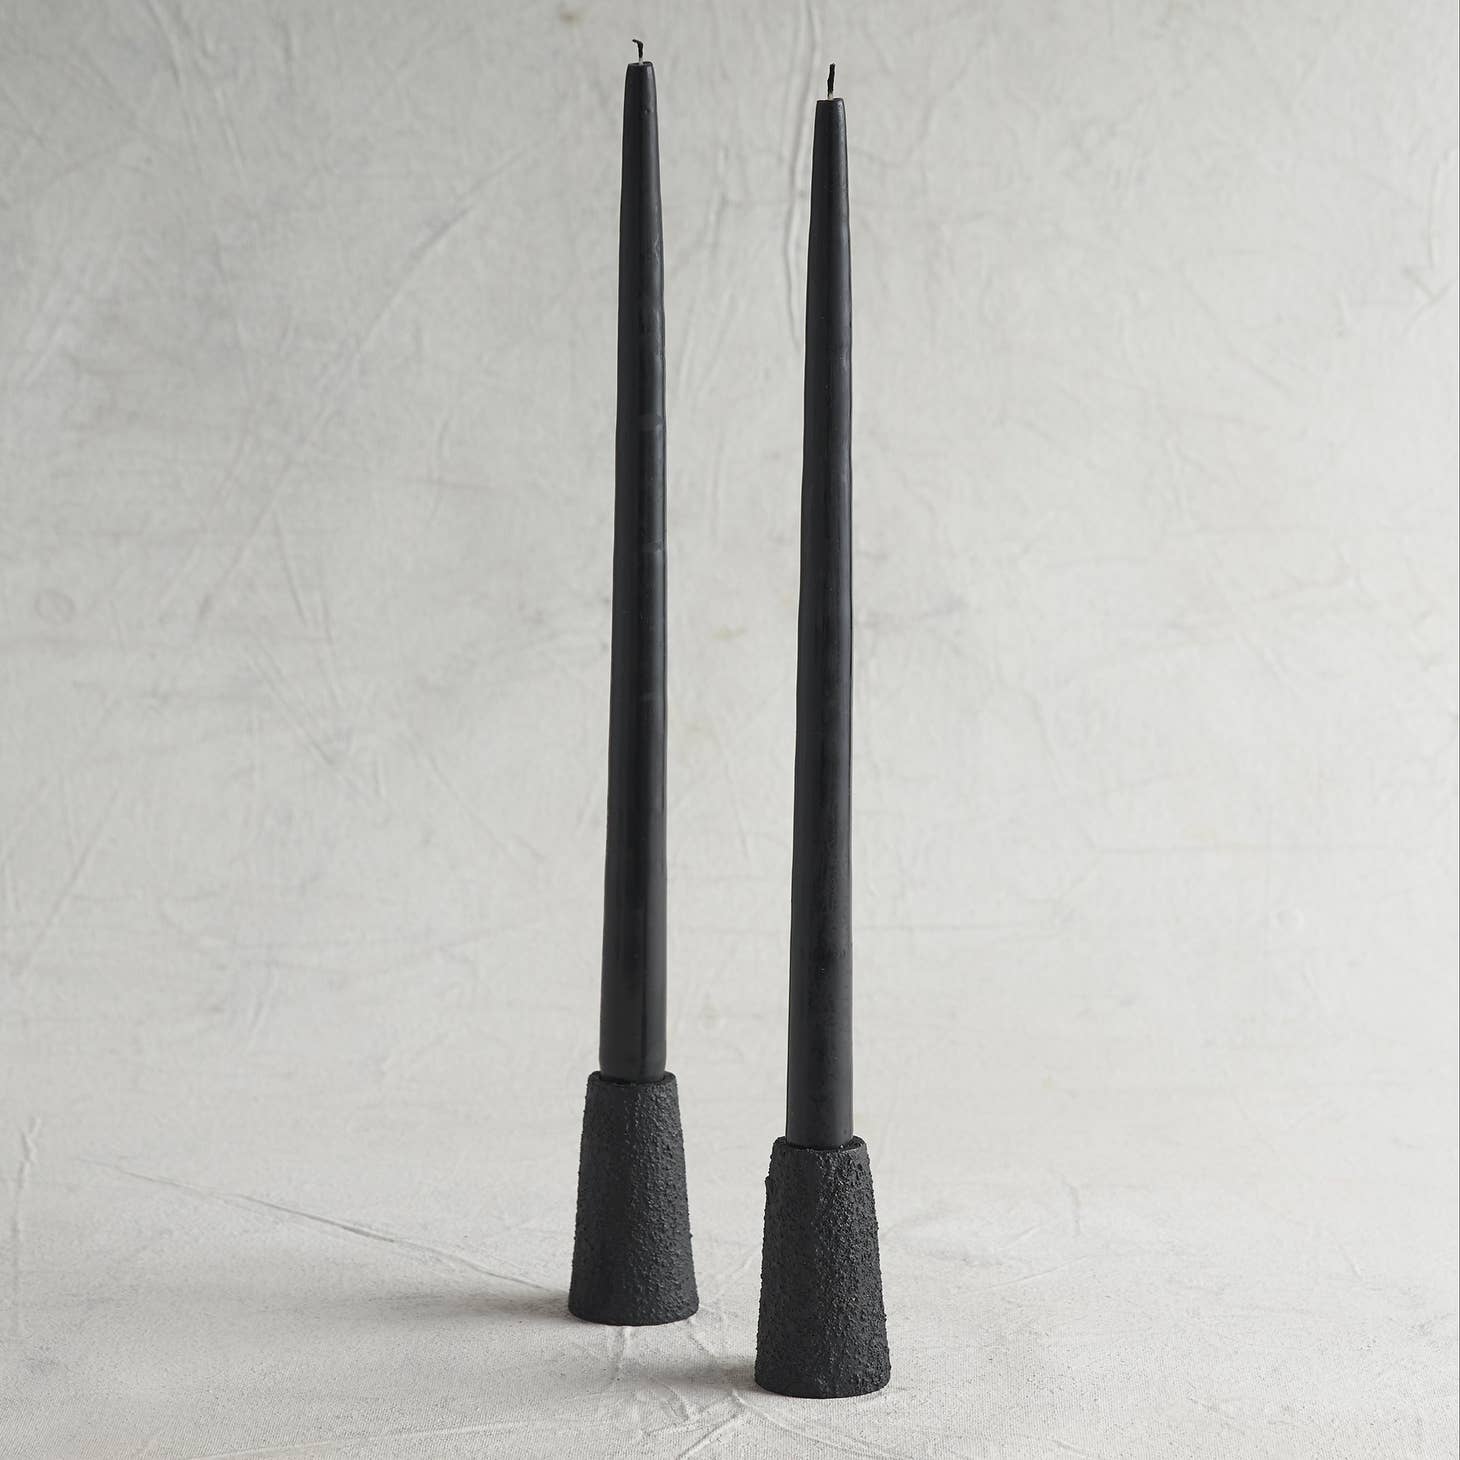 Thick, sand-cast aluminum forms are finished in a heavy, ash black textured coating, giving them a lava-like appearance. These taper holders fit the standard (7/8" diameter) candles and are backed with felt to prevent surface scratches. Made in India.